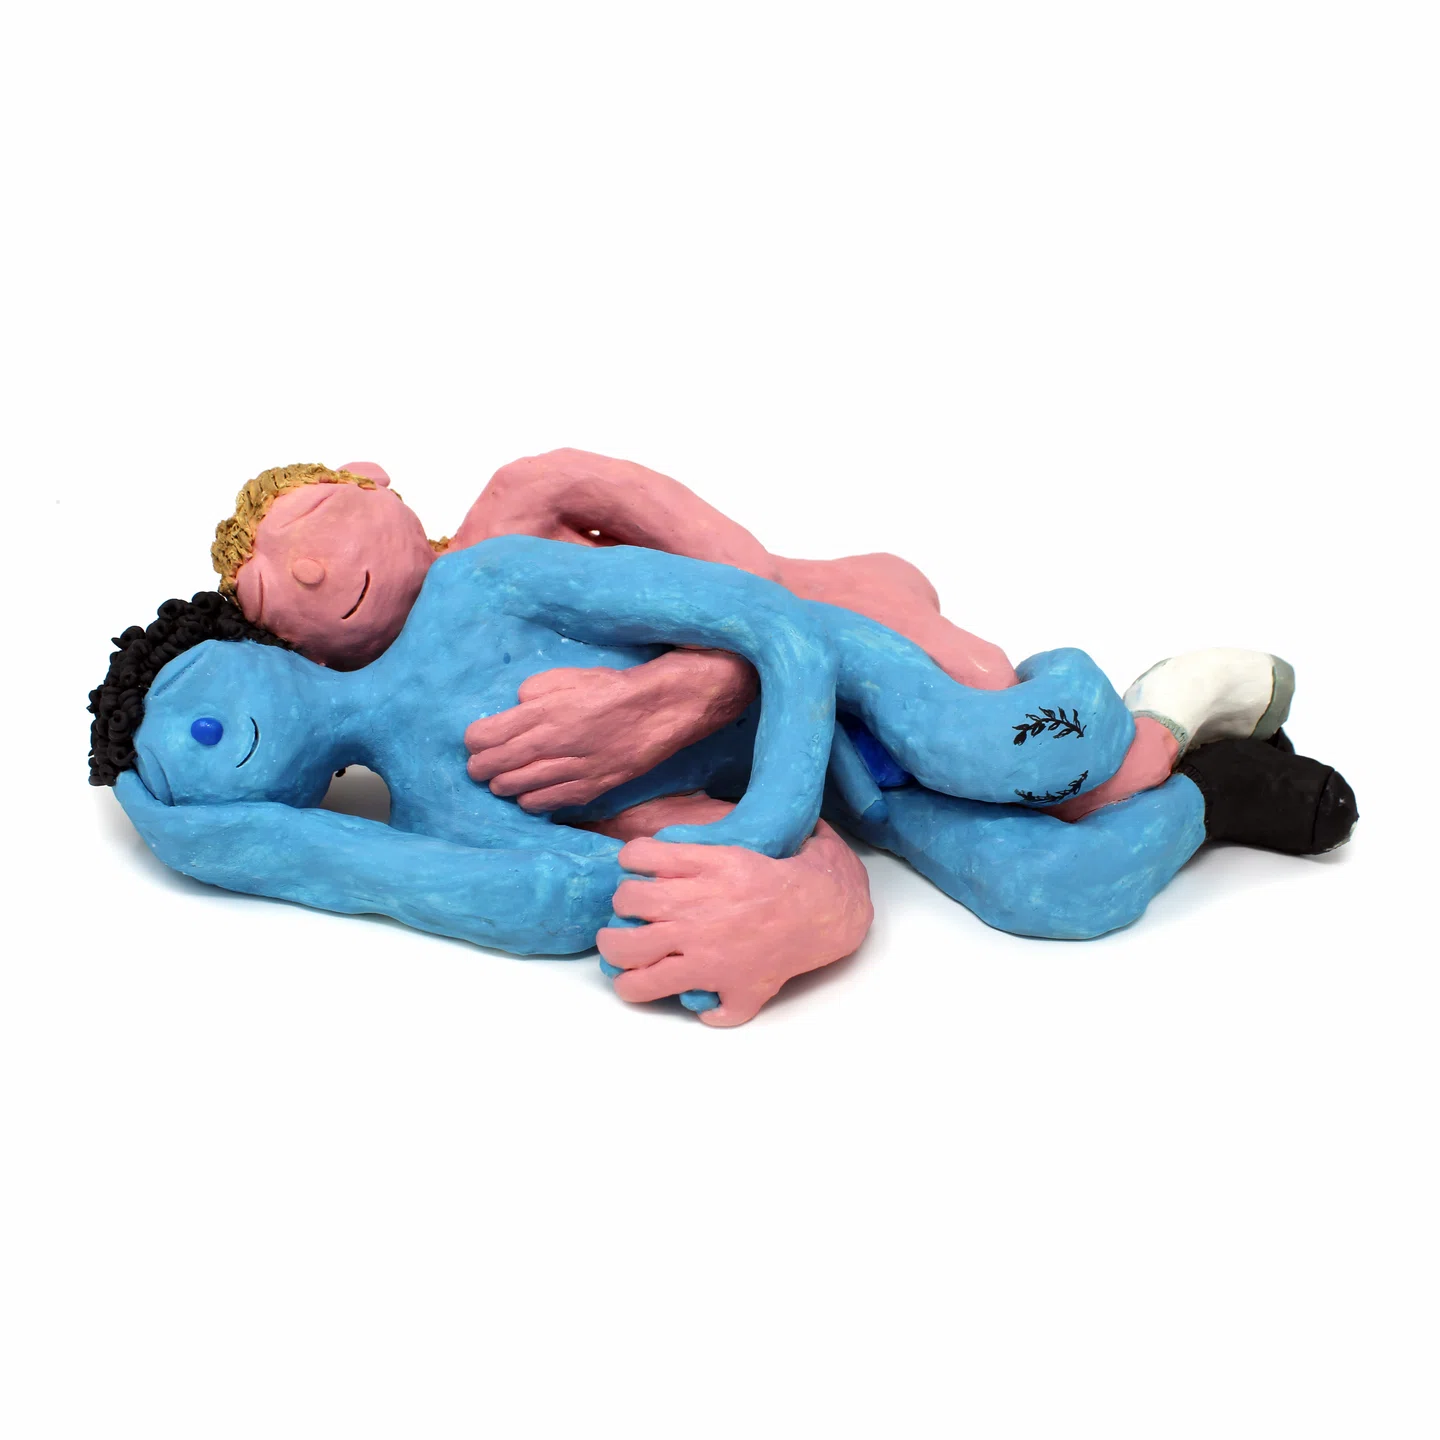 Vibrant And Emotive Queer Ceramic Sculptures By Colin J. Radcliffe (2)